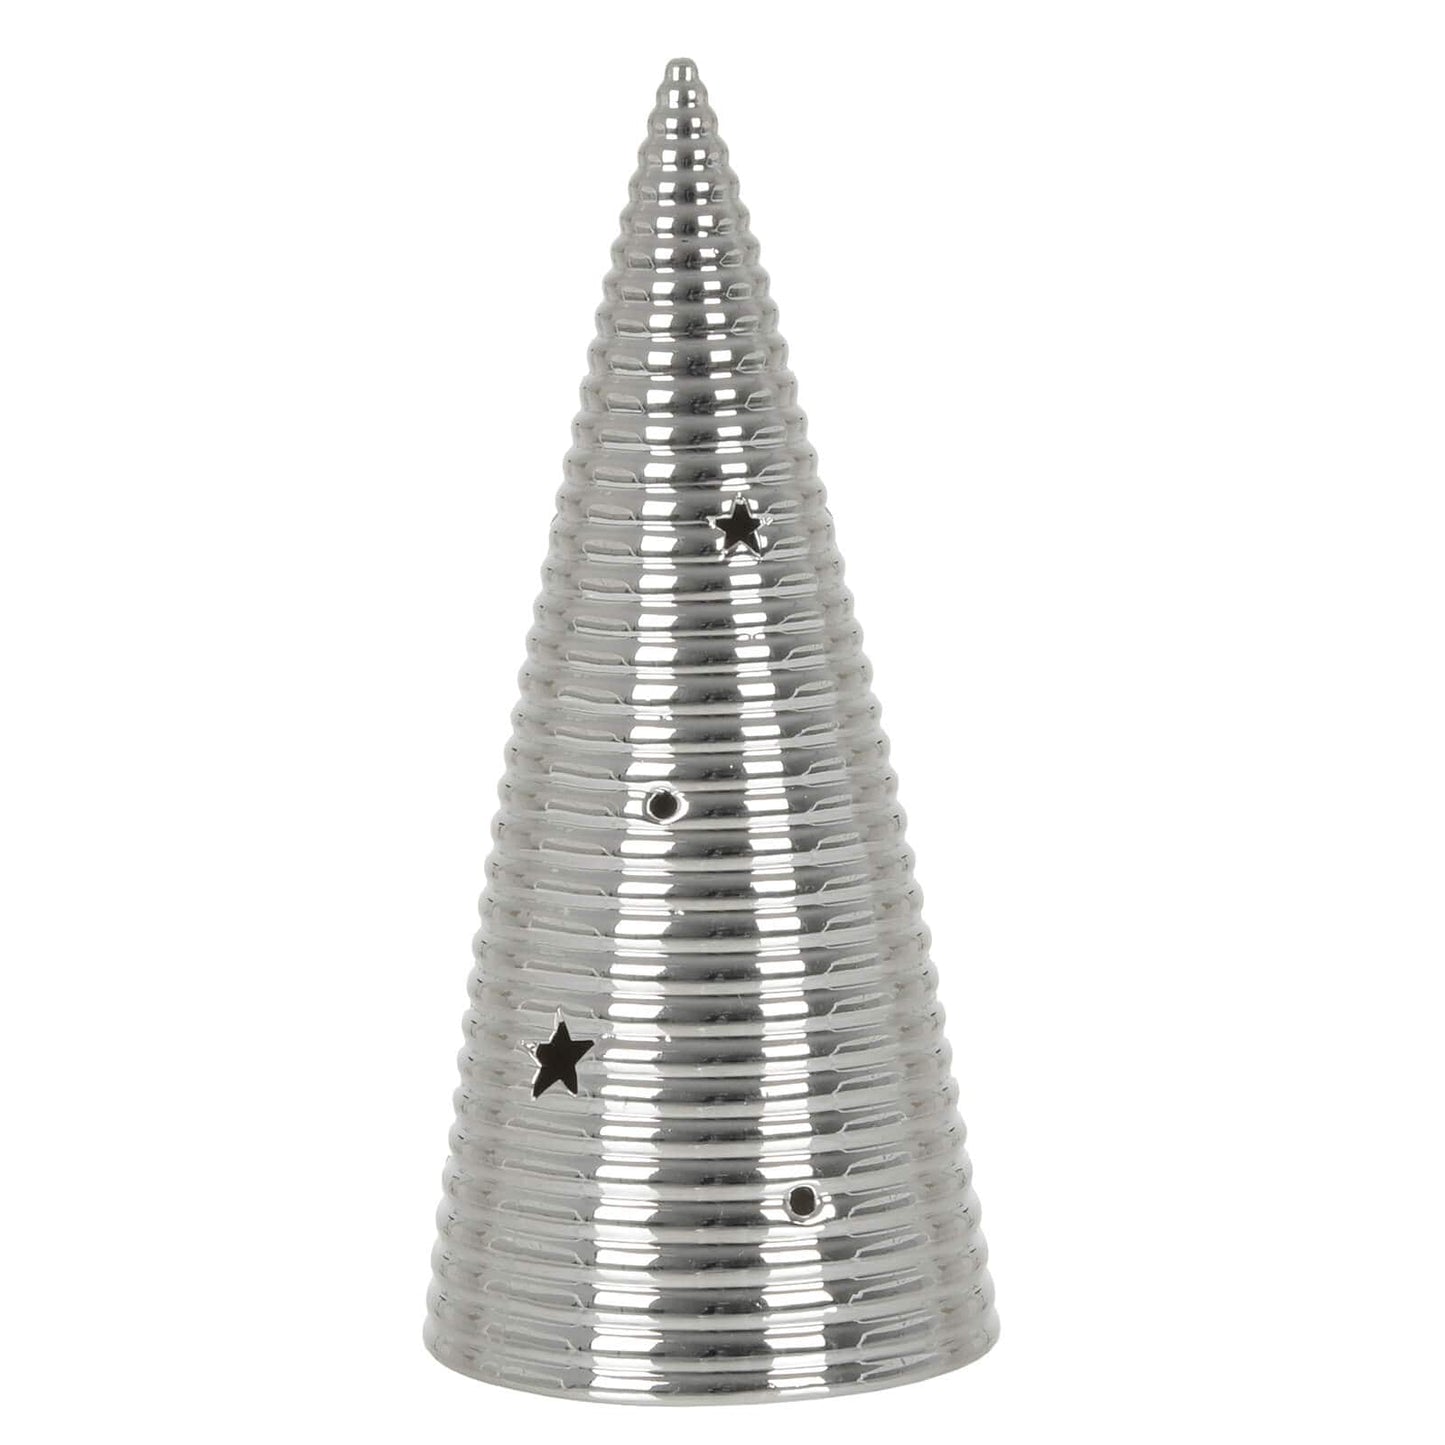 Silver ring design modern cone Christmas tree shaped ornament with cut away stars and circles for the light to shine through